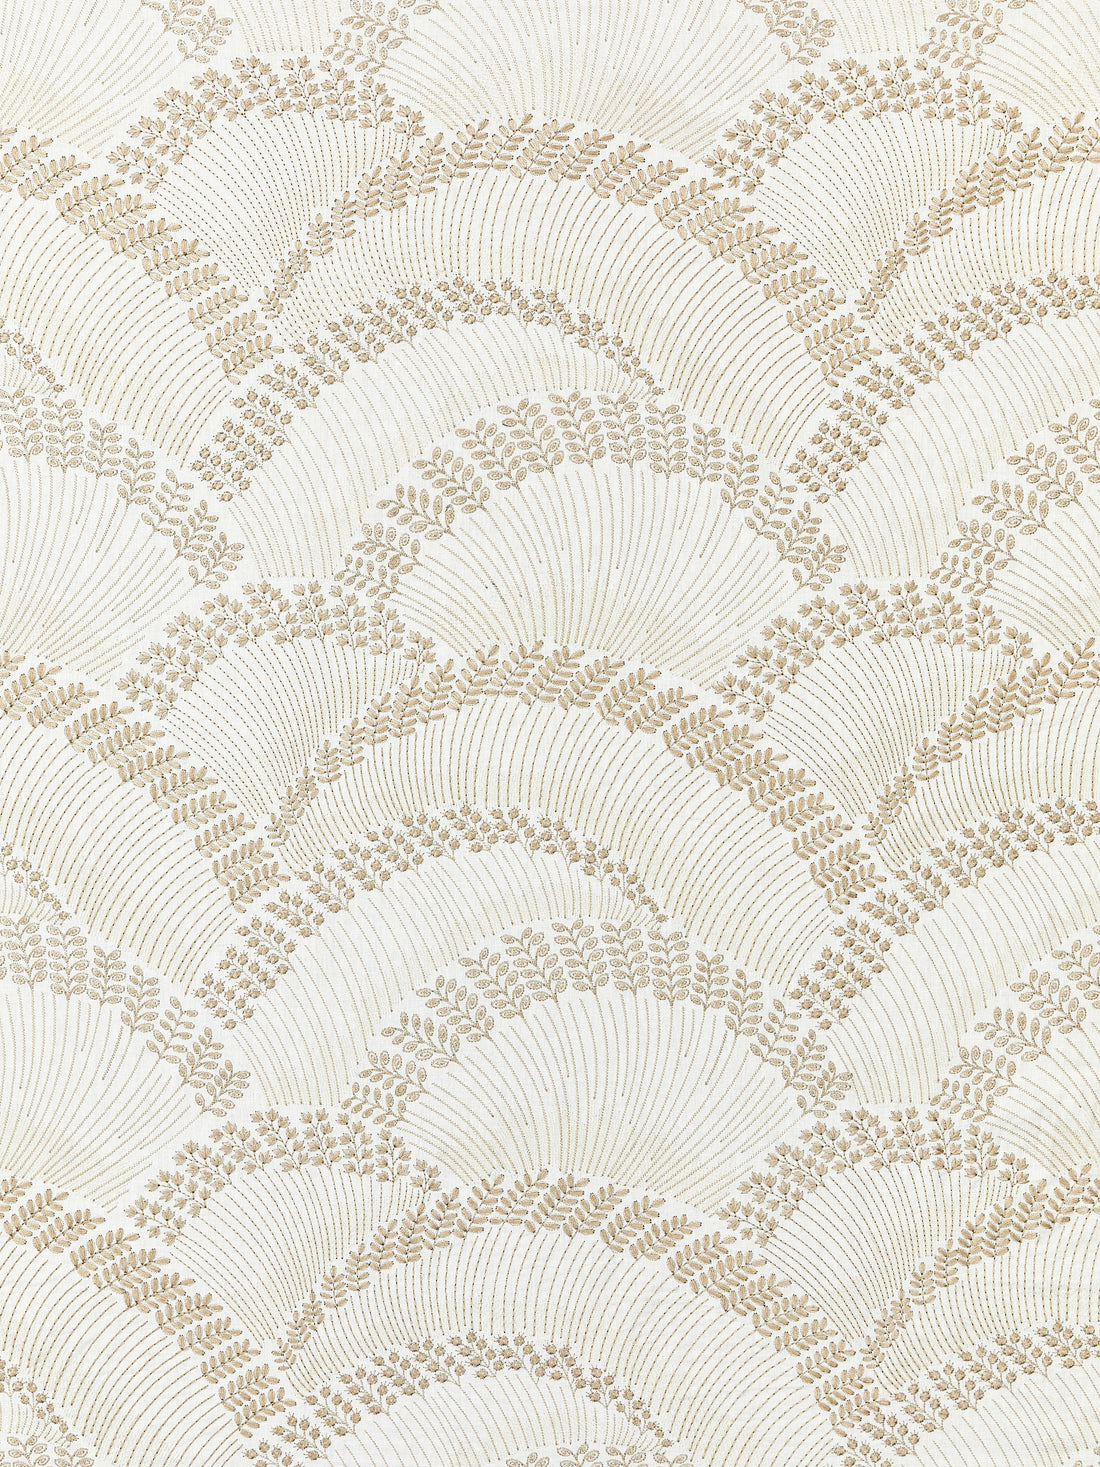 Lovegrass Embroidery fabric in latte color - pattern number SC 000127256 - by Scalamandre in the Scalamandre Fabrics Book 1 collection